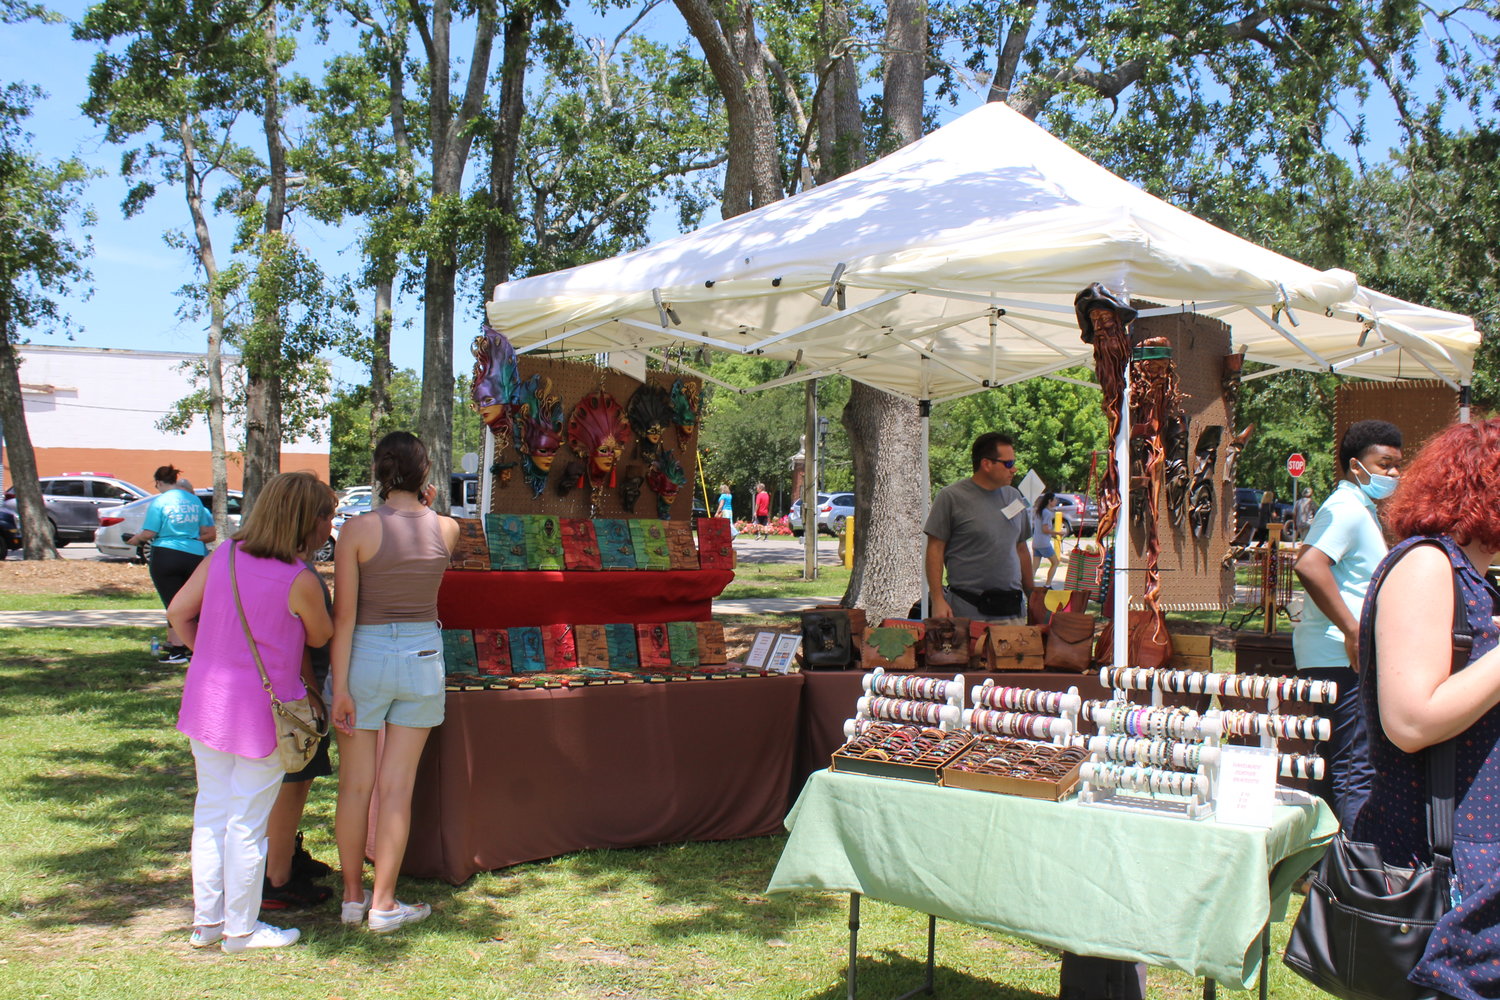 Since 1971, Art in the Park has been a Mother's Day weekend staple event.